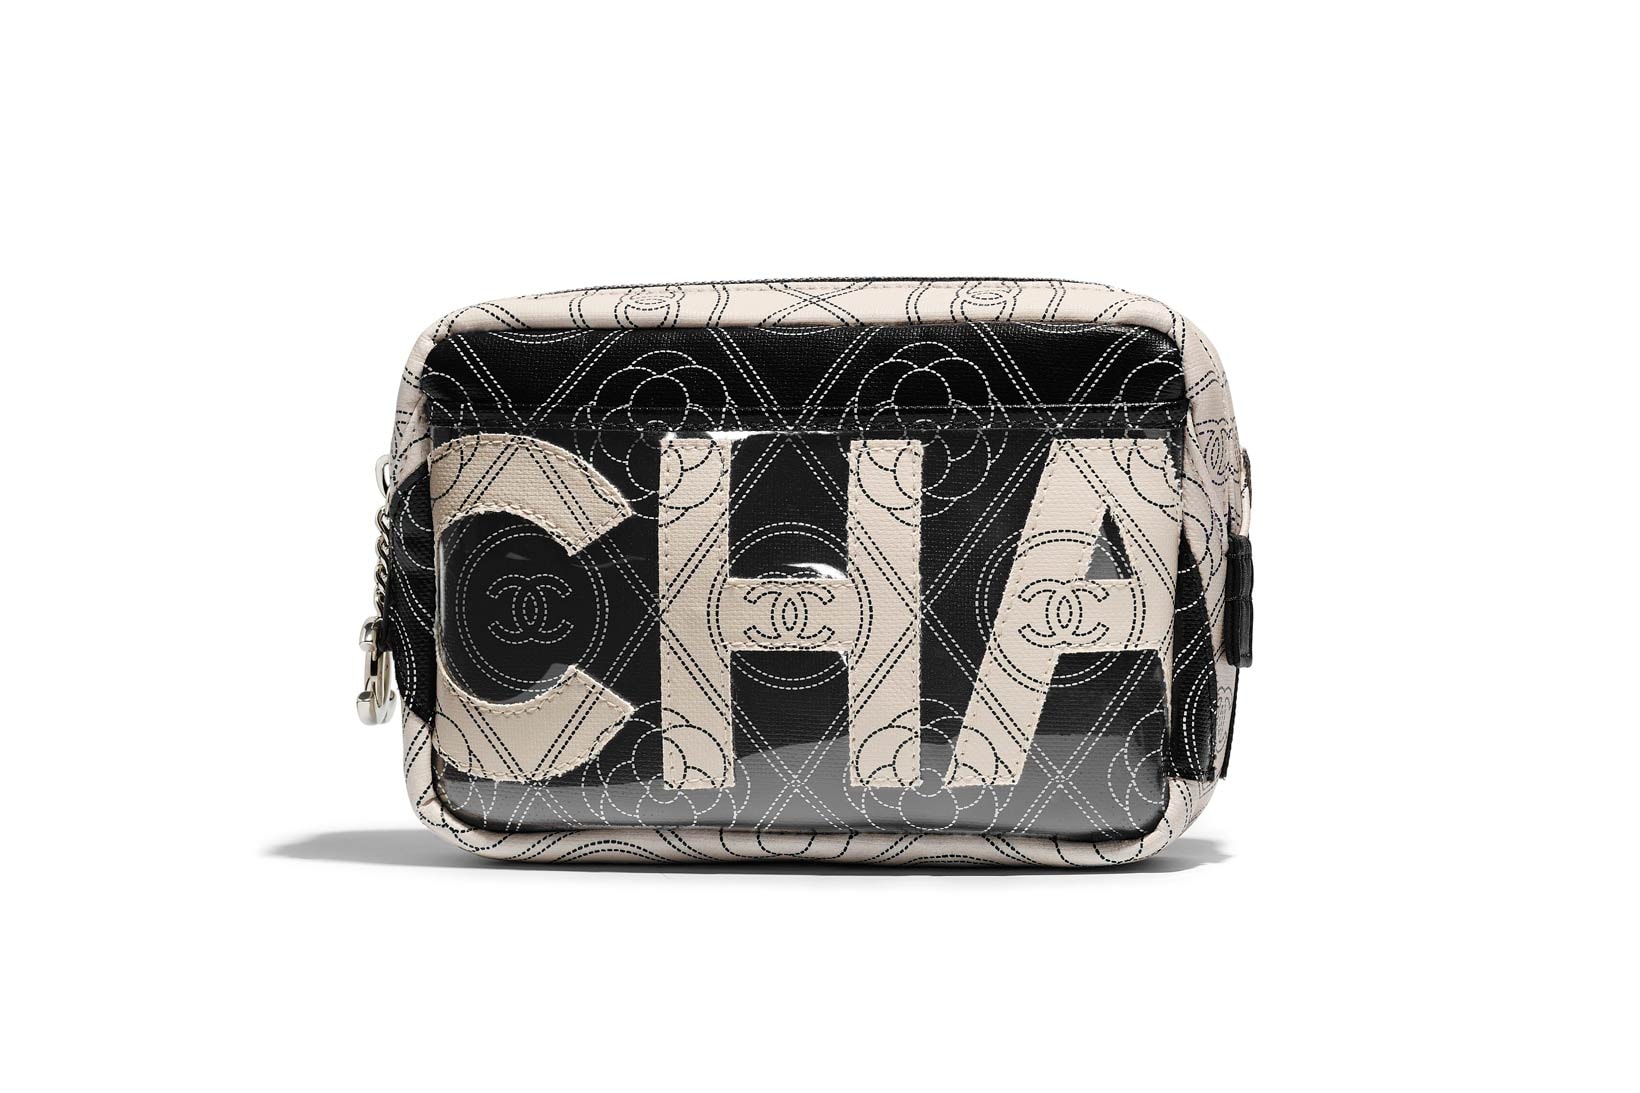 Chanel Releases Spring 2018 Handbag Collection with 100+ of Its